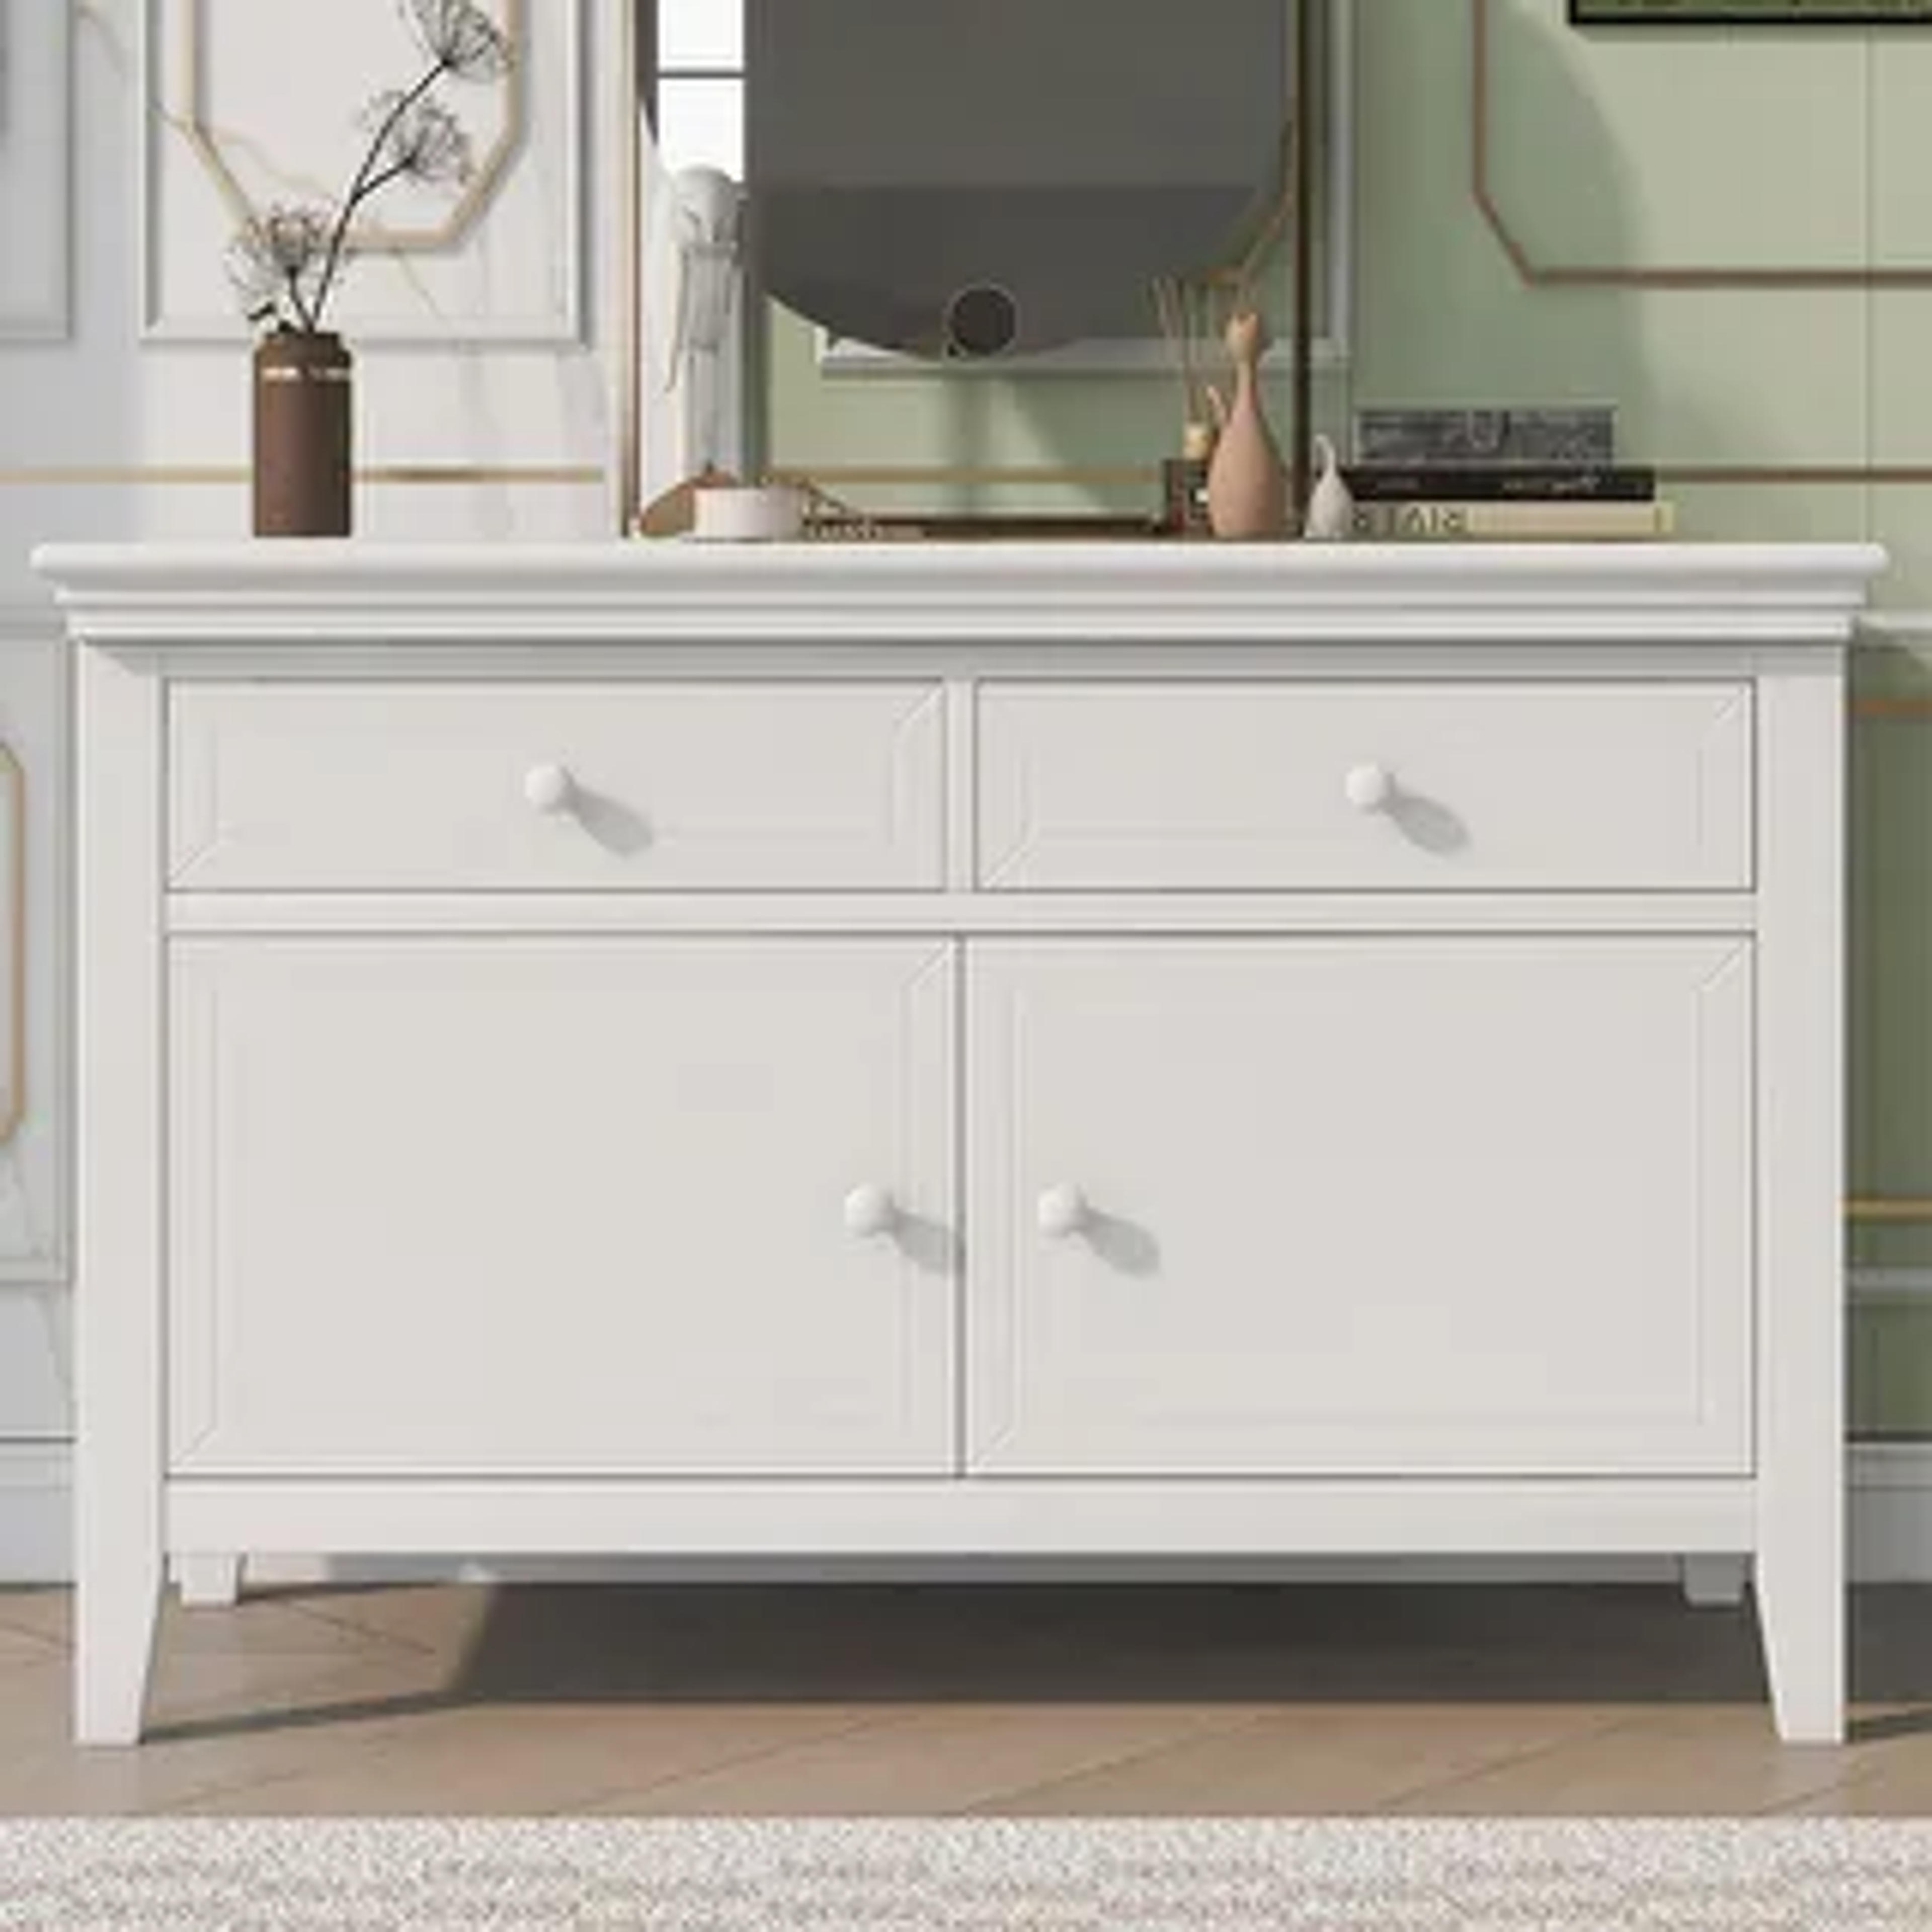 Concise Style White Wooden Dresser with Storage Space - Bed Bath & Beyond - 36951509